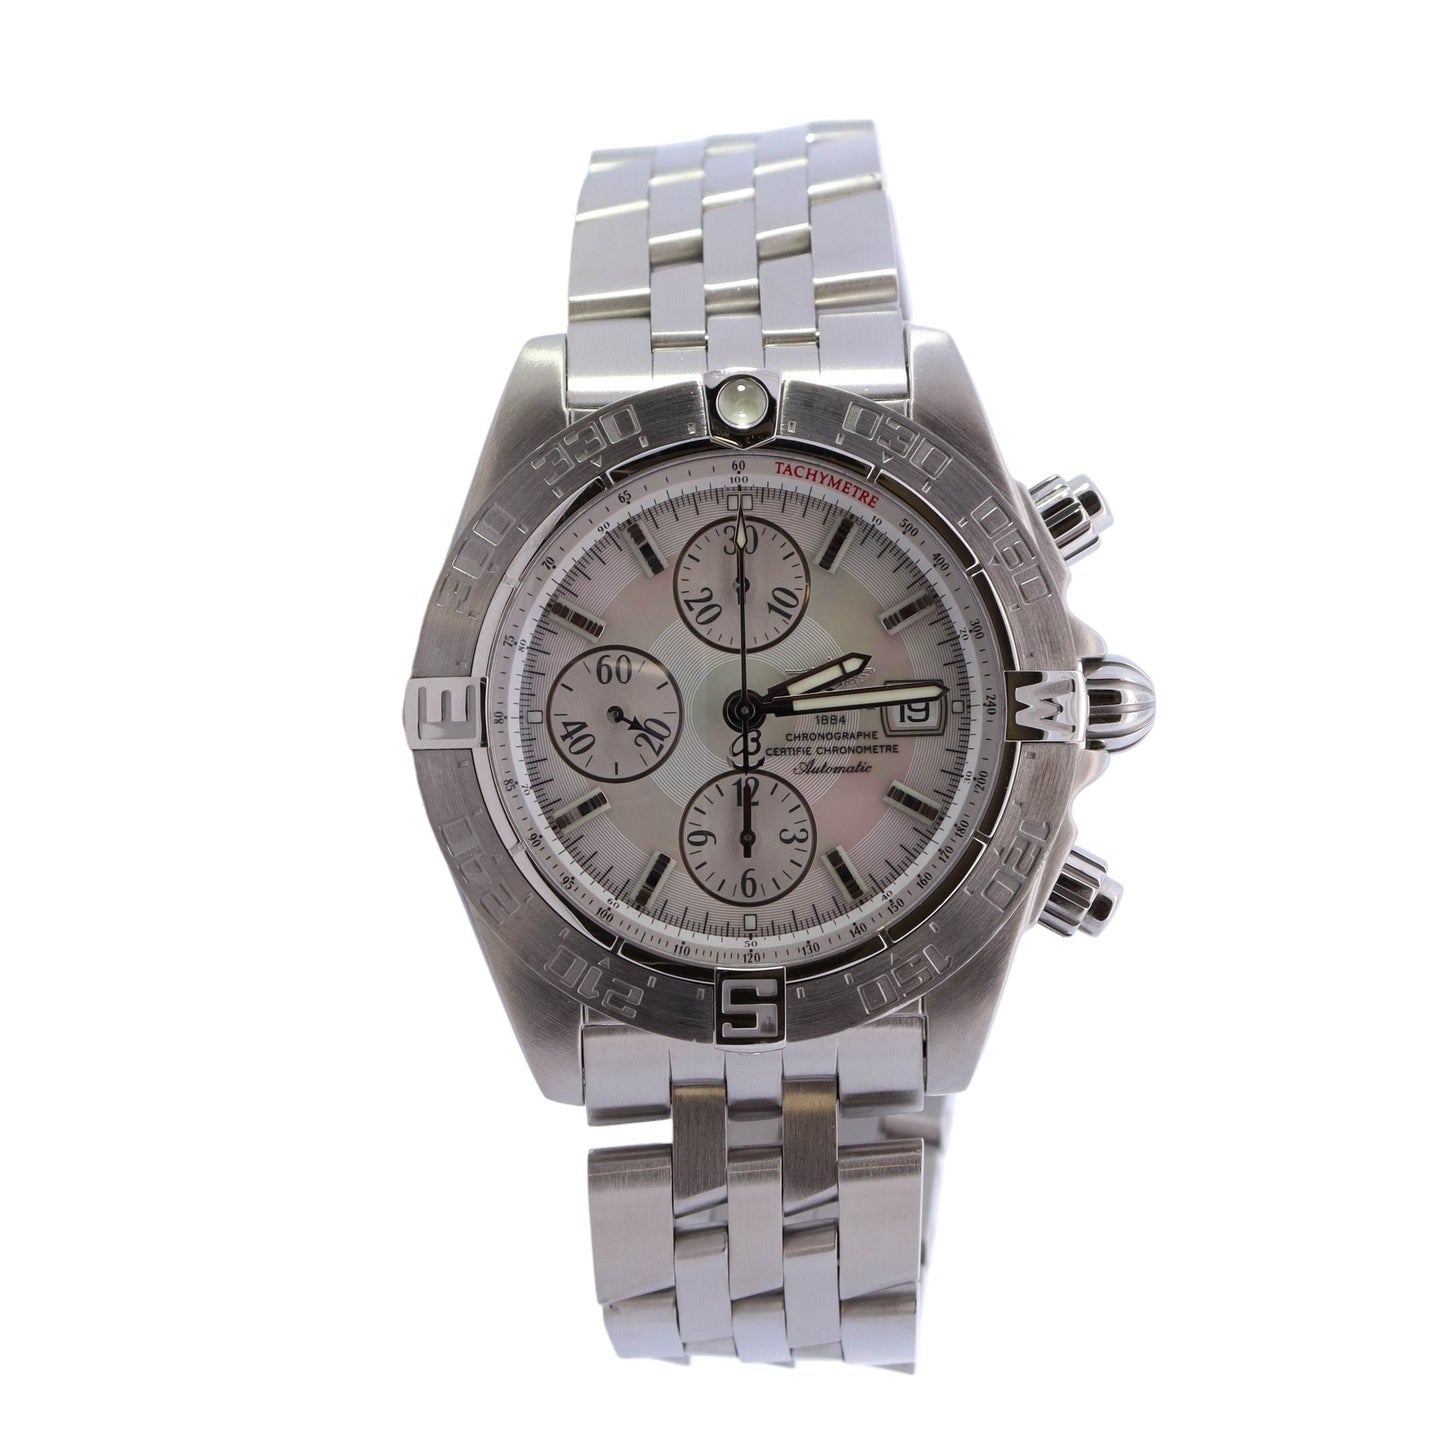 Breitling Galatic Stainless Steel 44mm MOP Chronograph Dial Watch Reference# A13364 - Happy Jewelers Fine Jewelry Lifetime Warranty